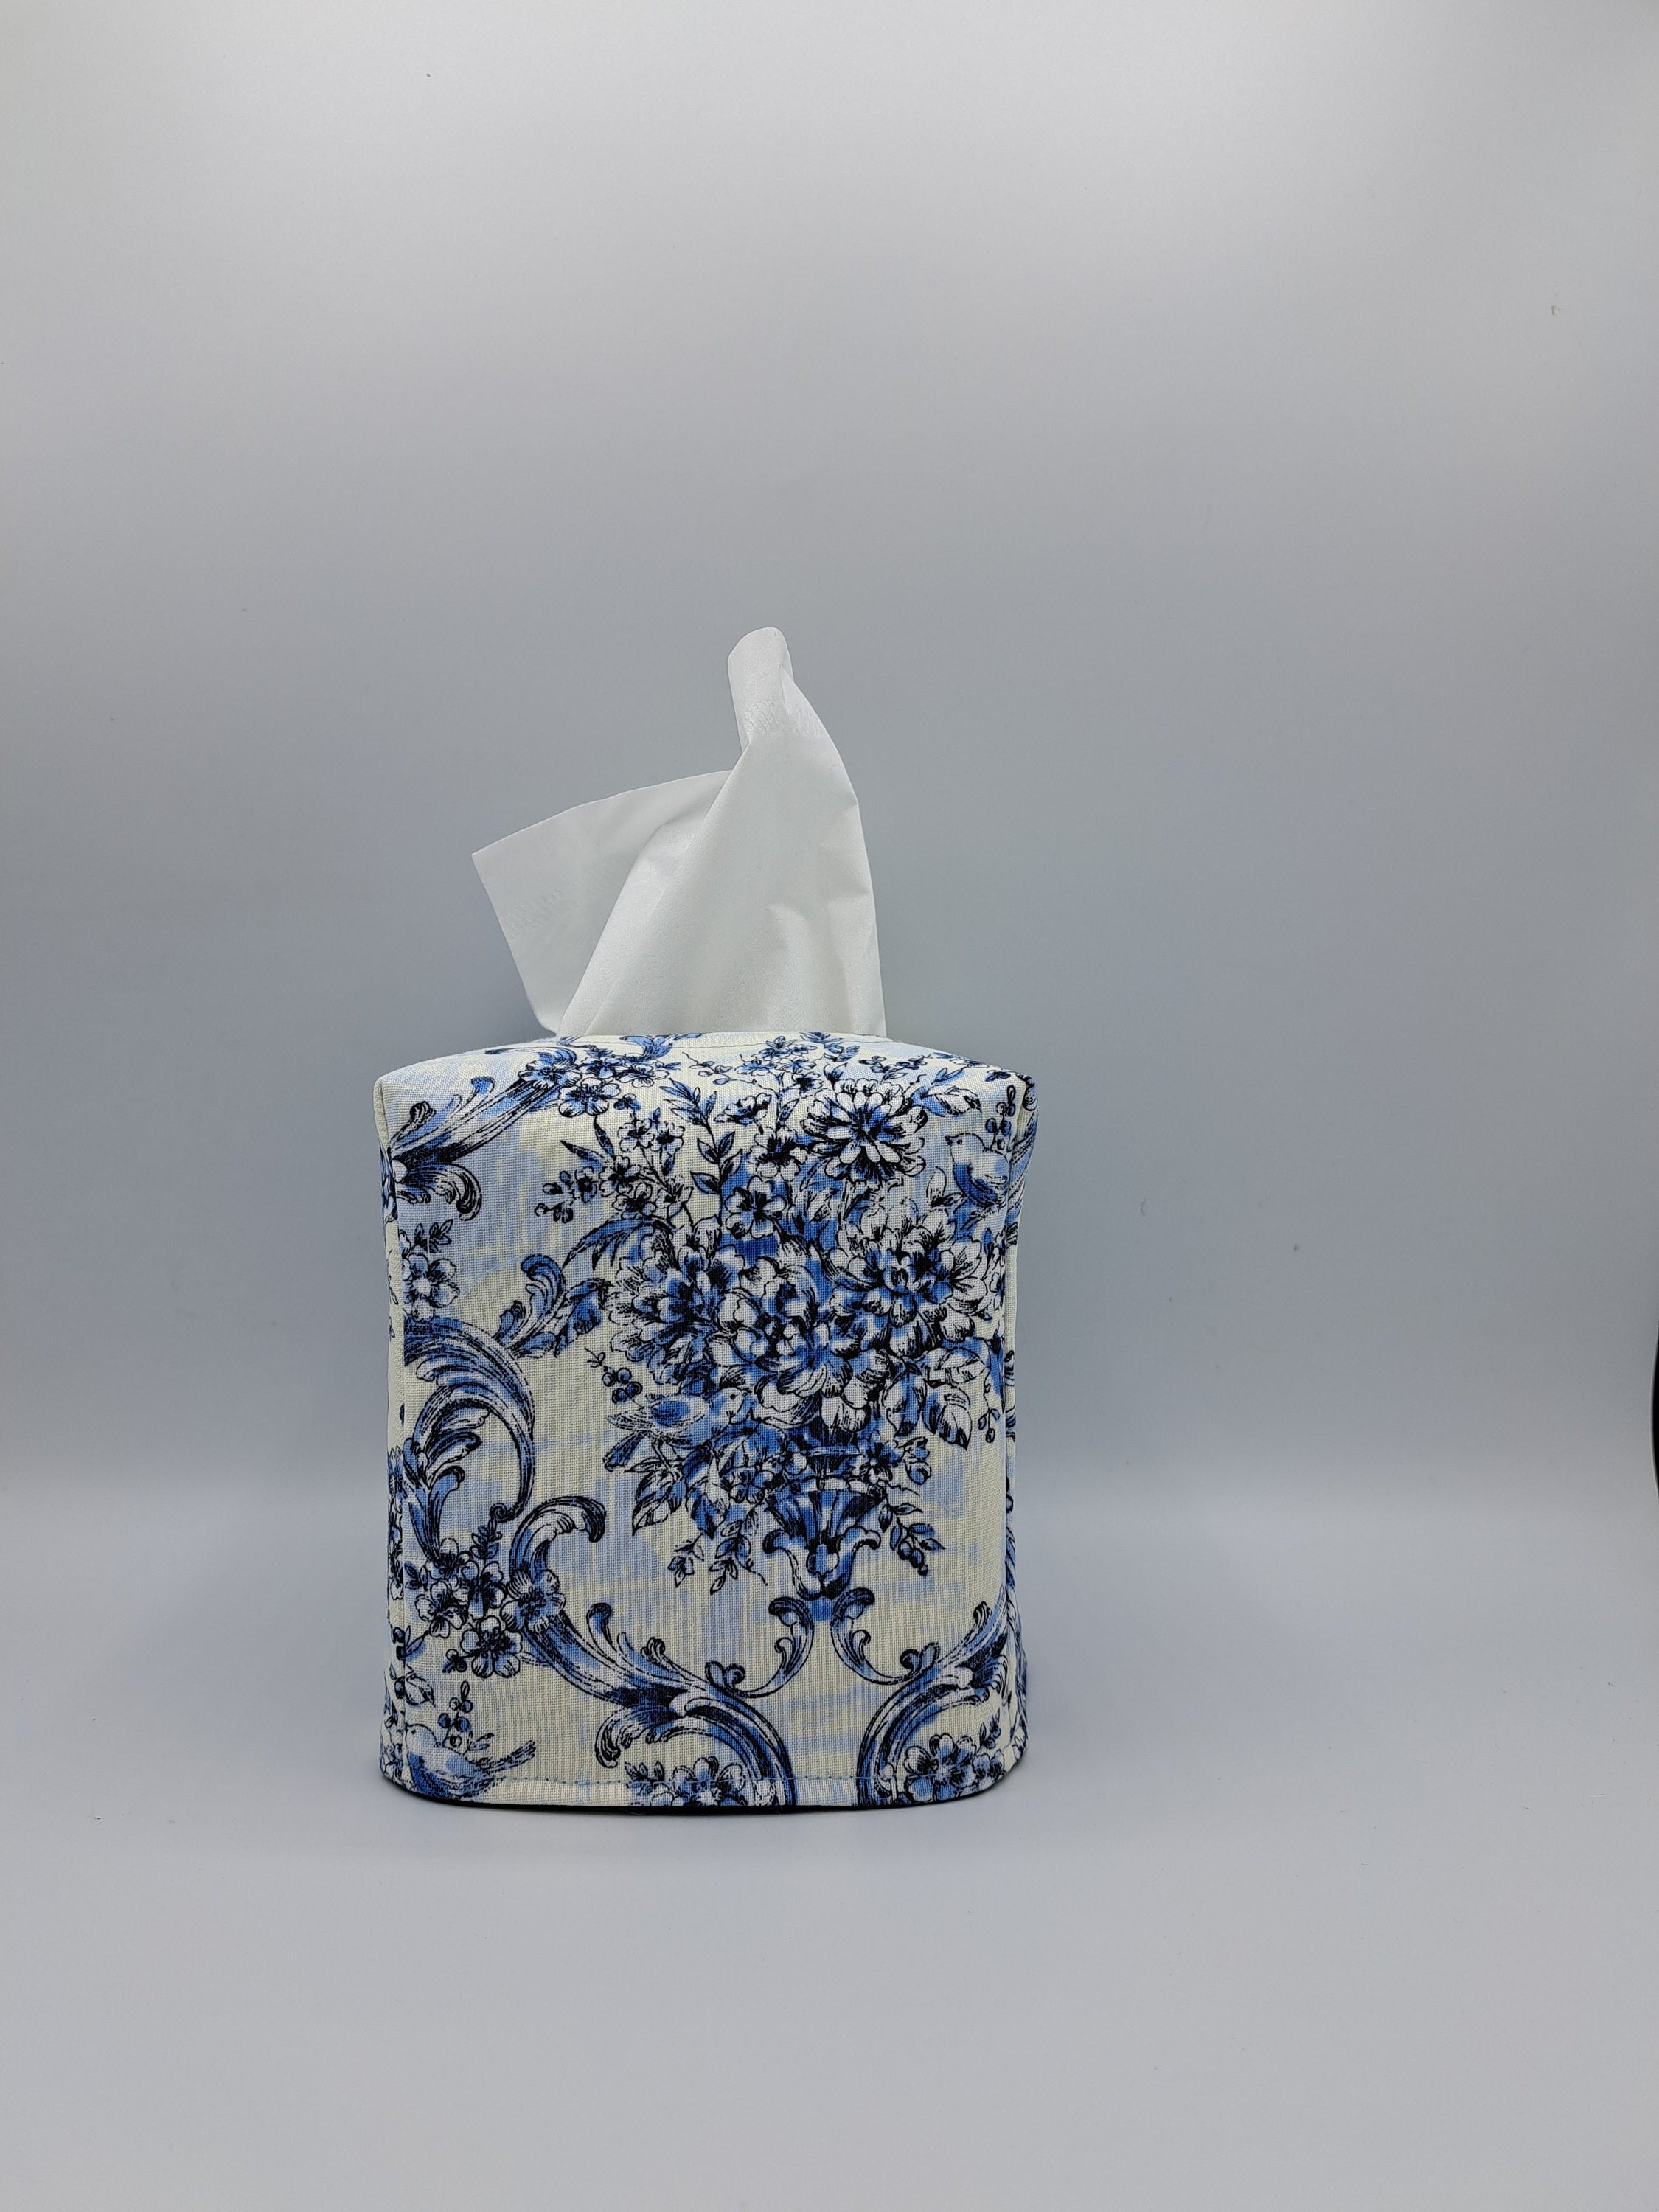 Tissue Box Cover, Hand Carved Ceramic Birds and Blossoms Square